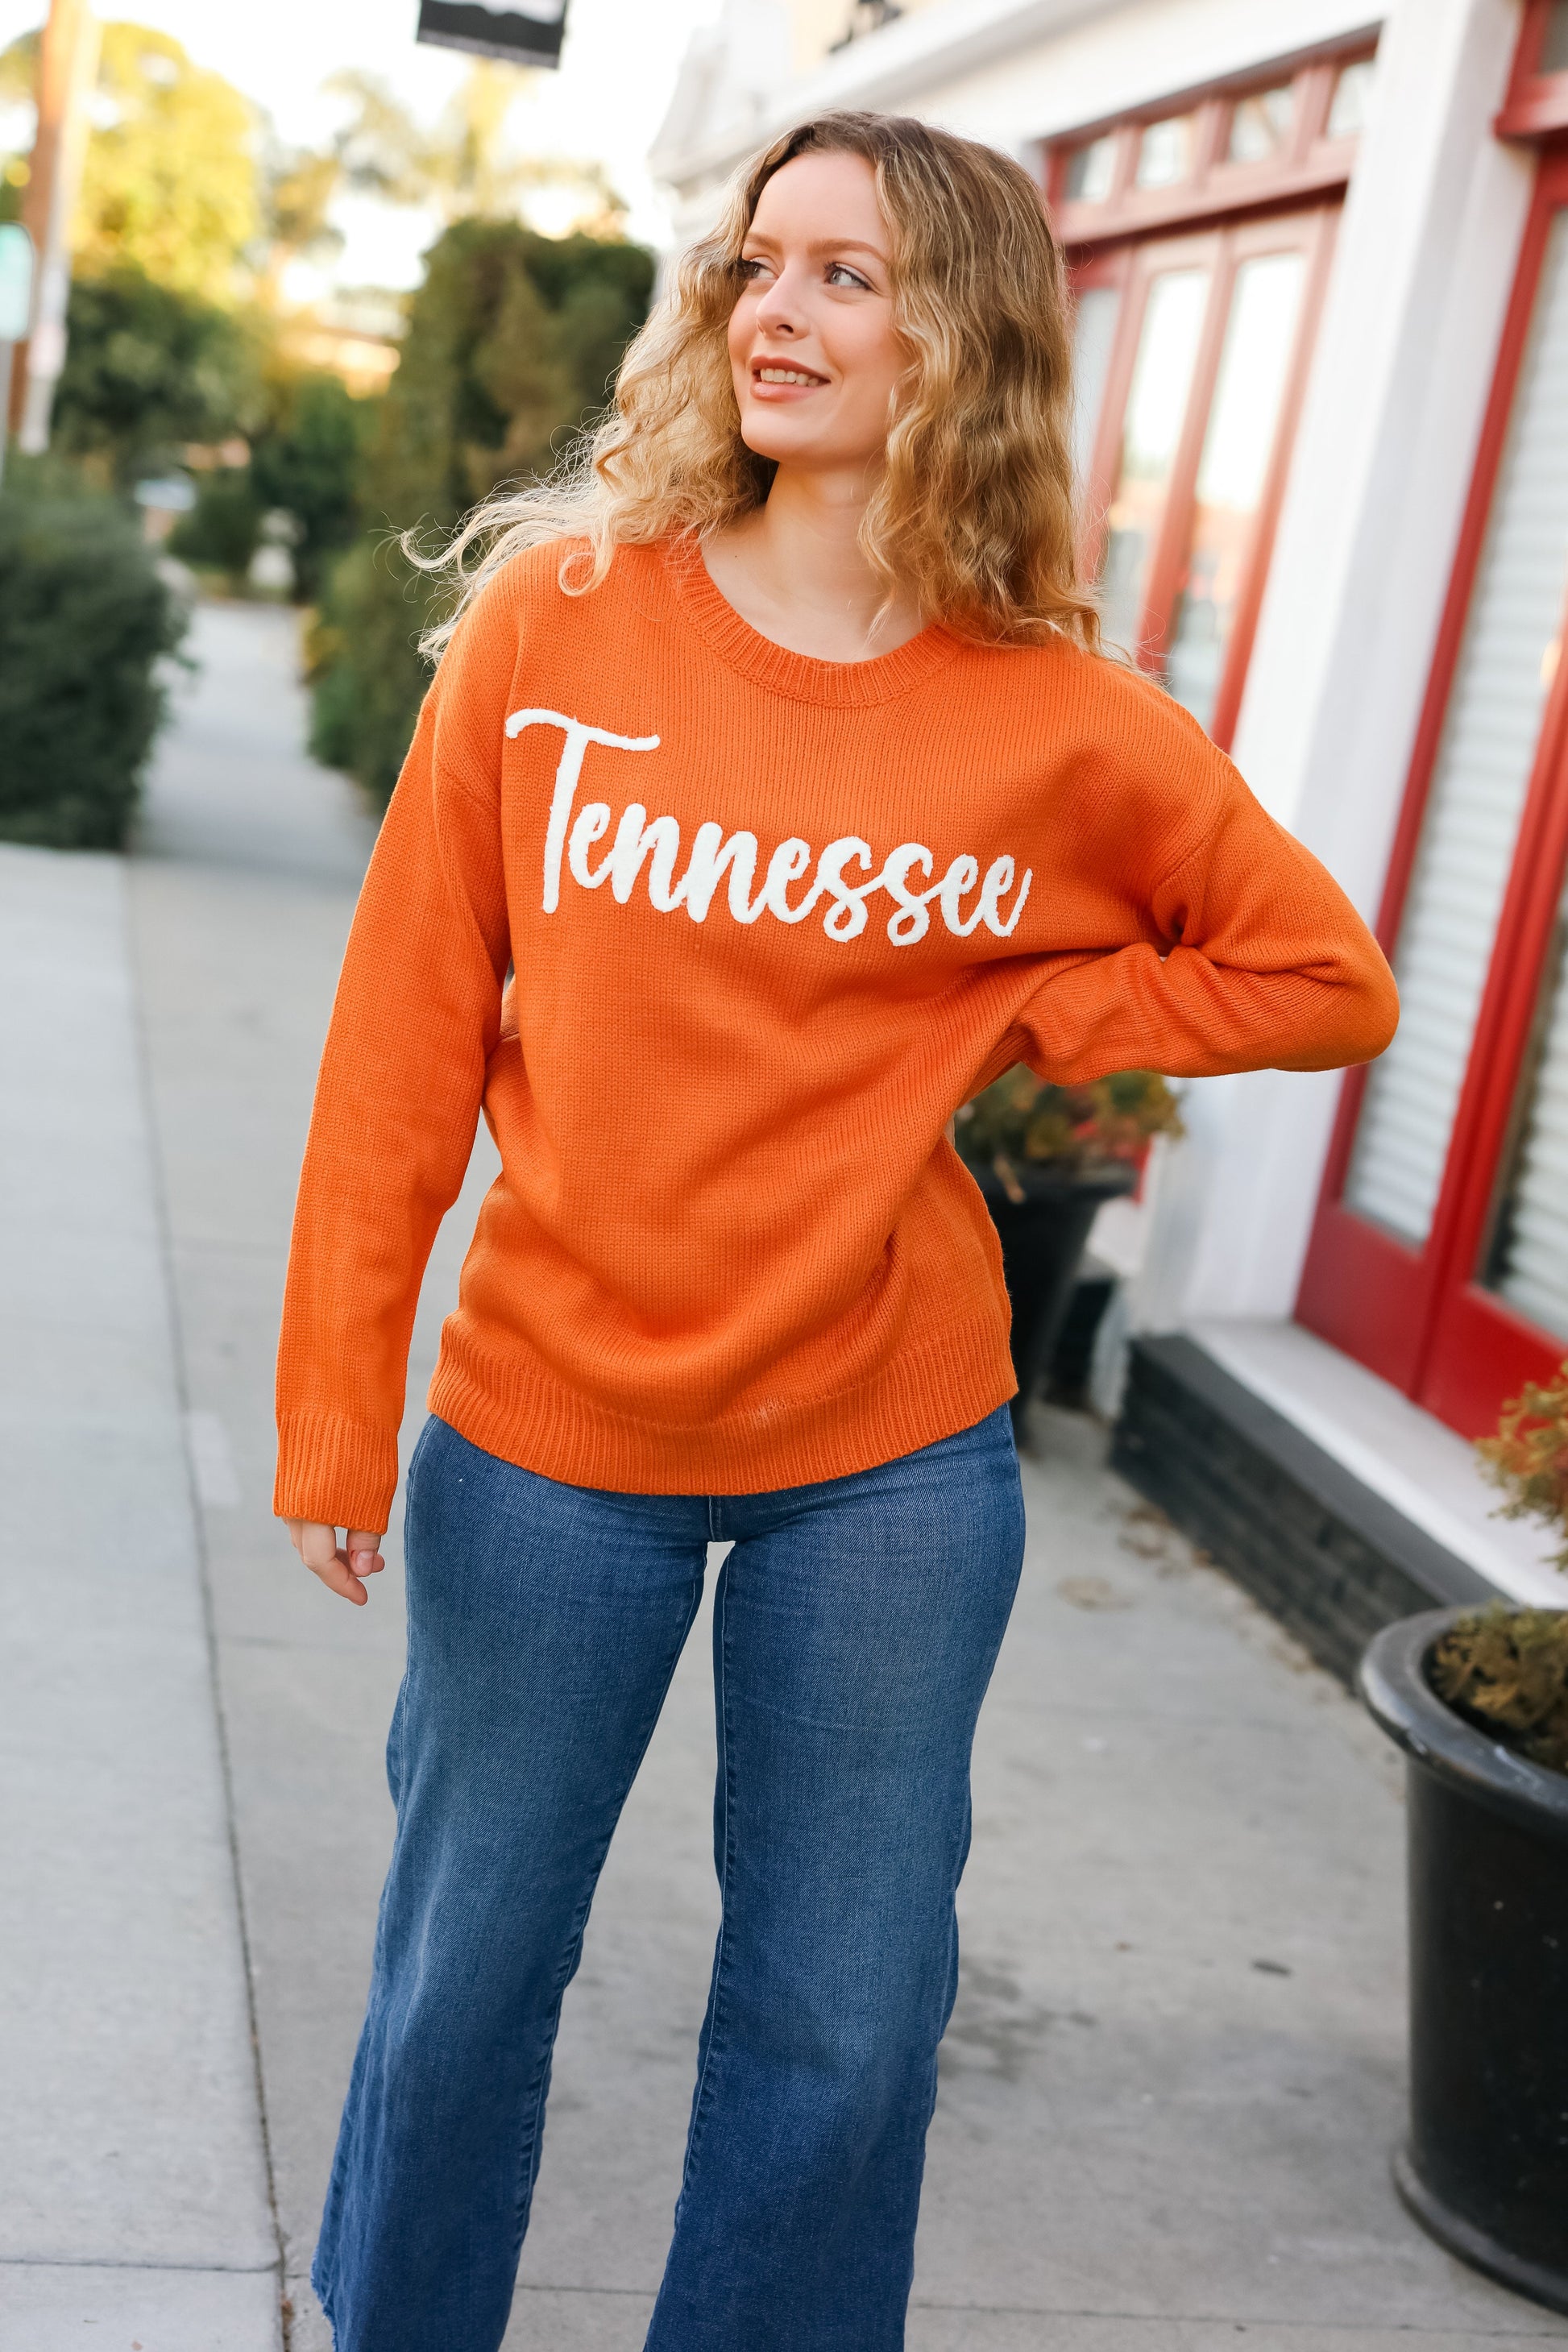 Game Day Orange "Tennessee" Embroidery Pop Up Sweater Jordan Marie